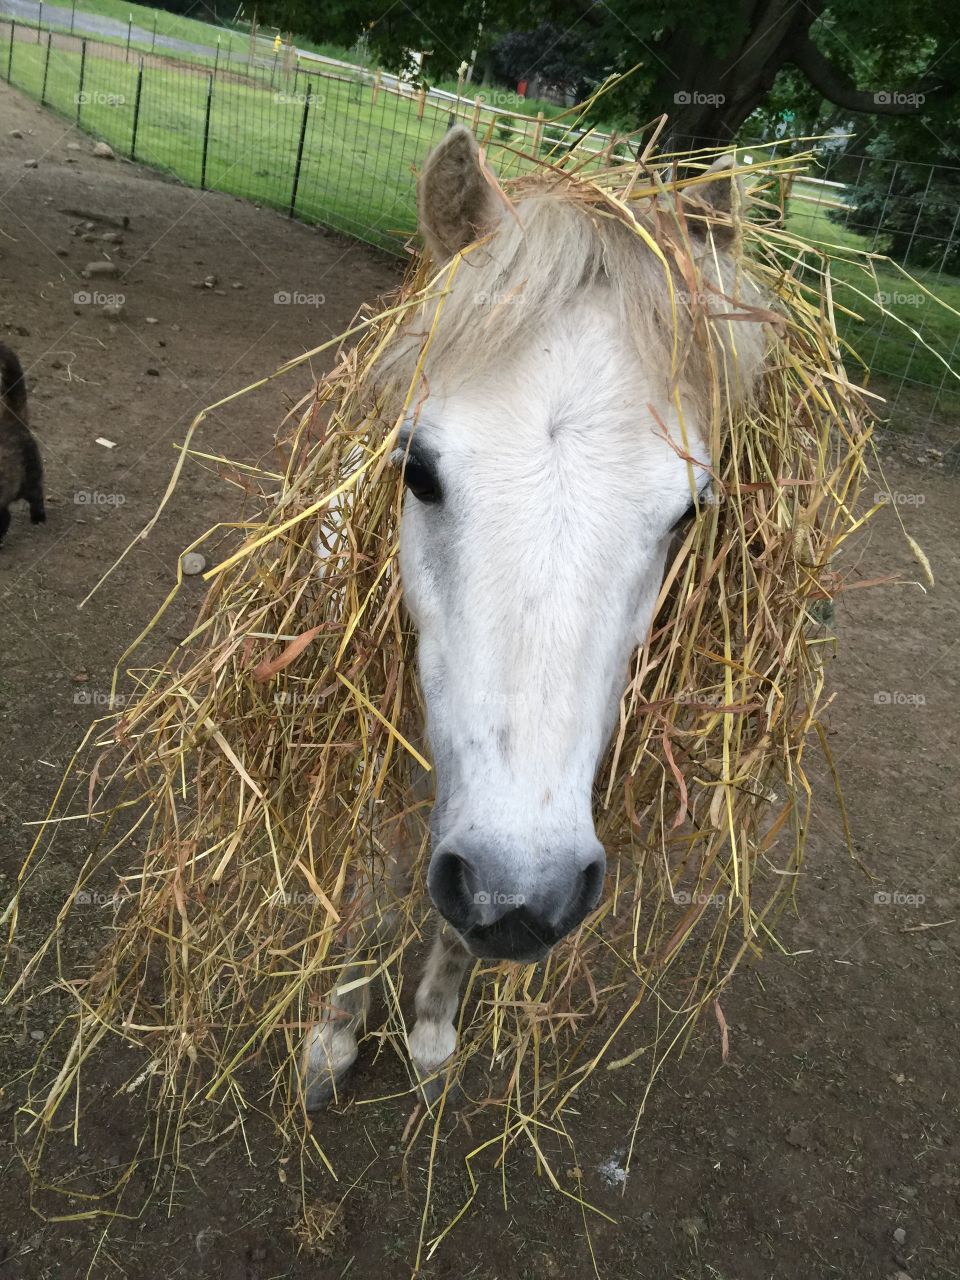 Horse with a bad hair day